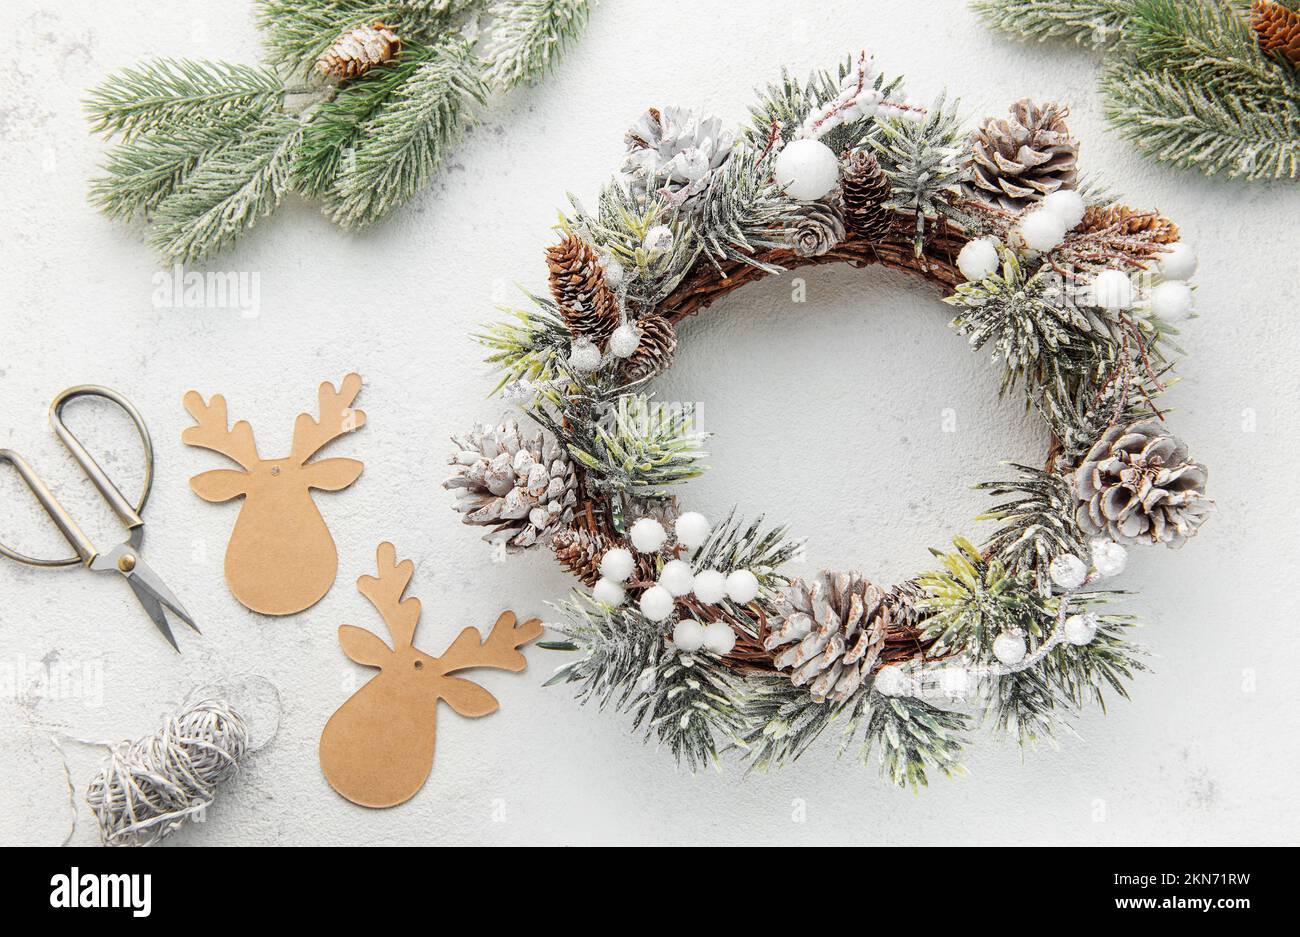 Decorative festive Christmas wreath. Wreath made of fir tree and cones on a grey concrete background. Christmas decorations Stock Photo